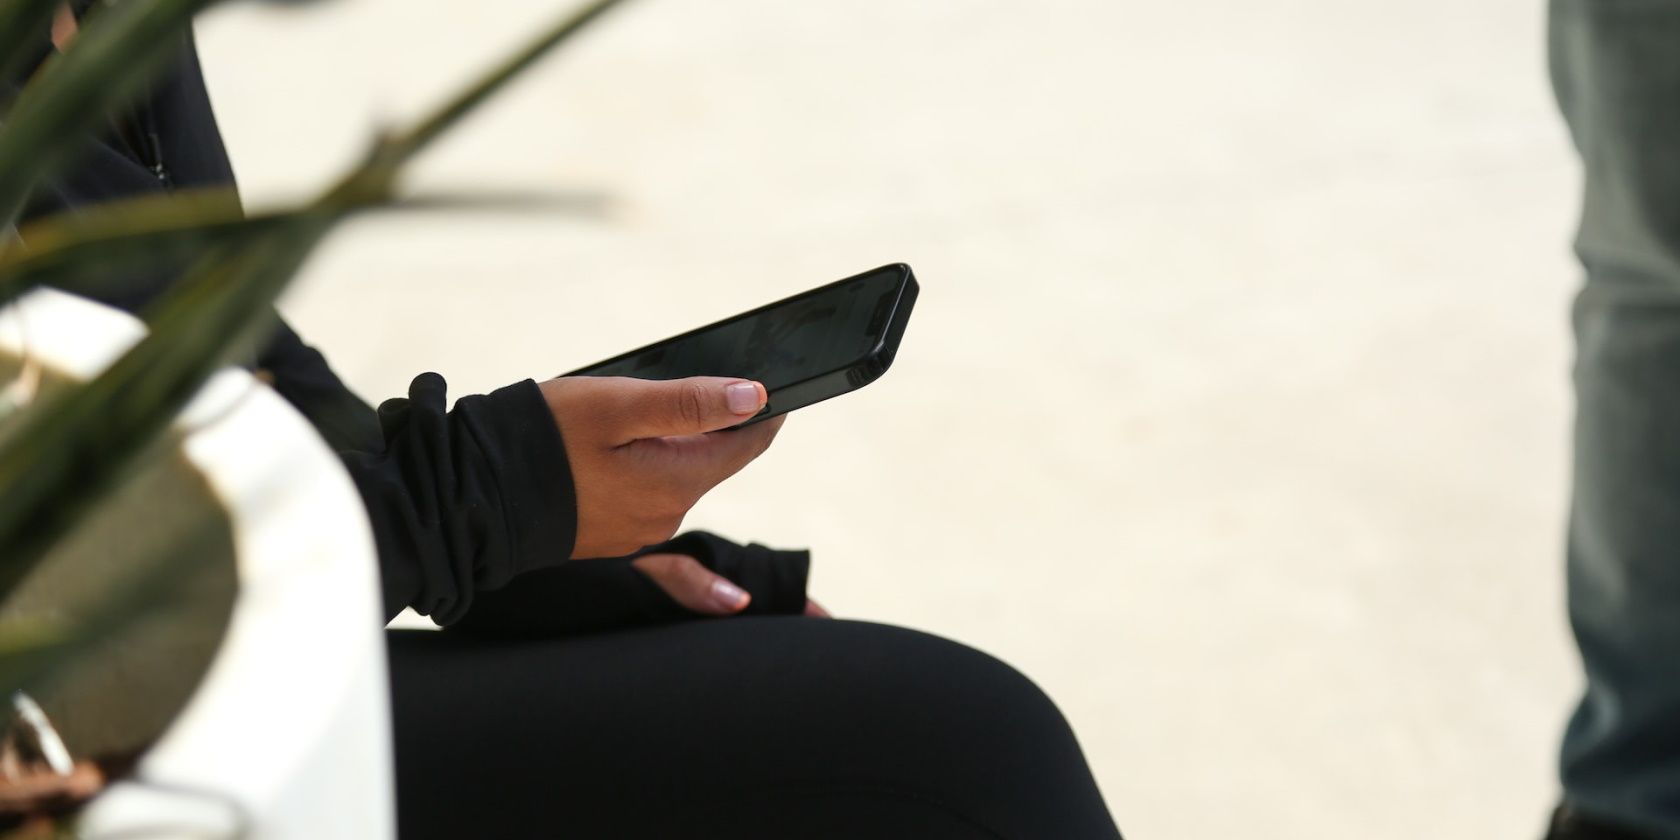 A hand holding a smartphone